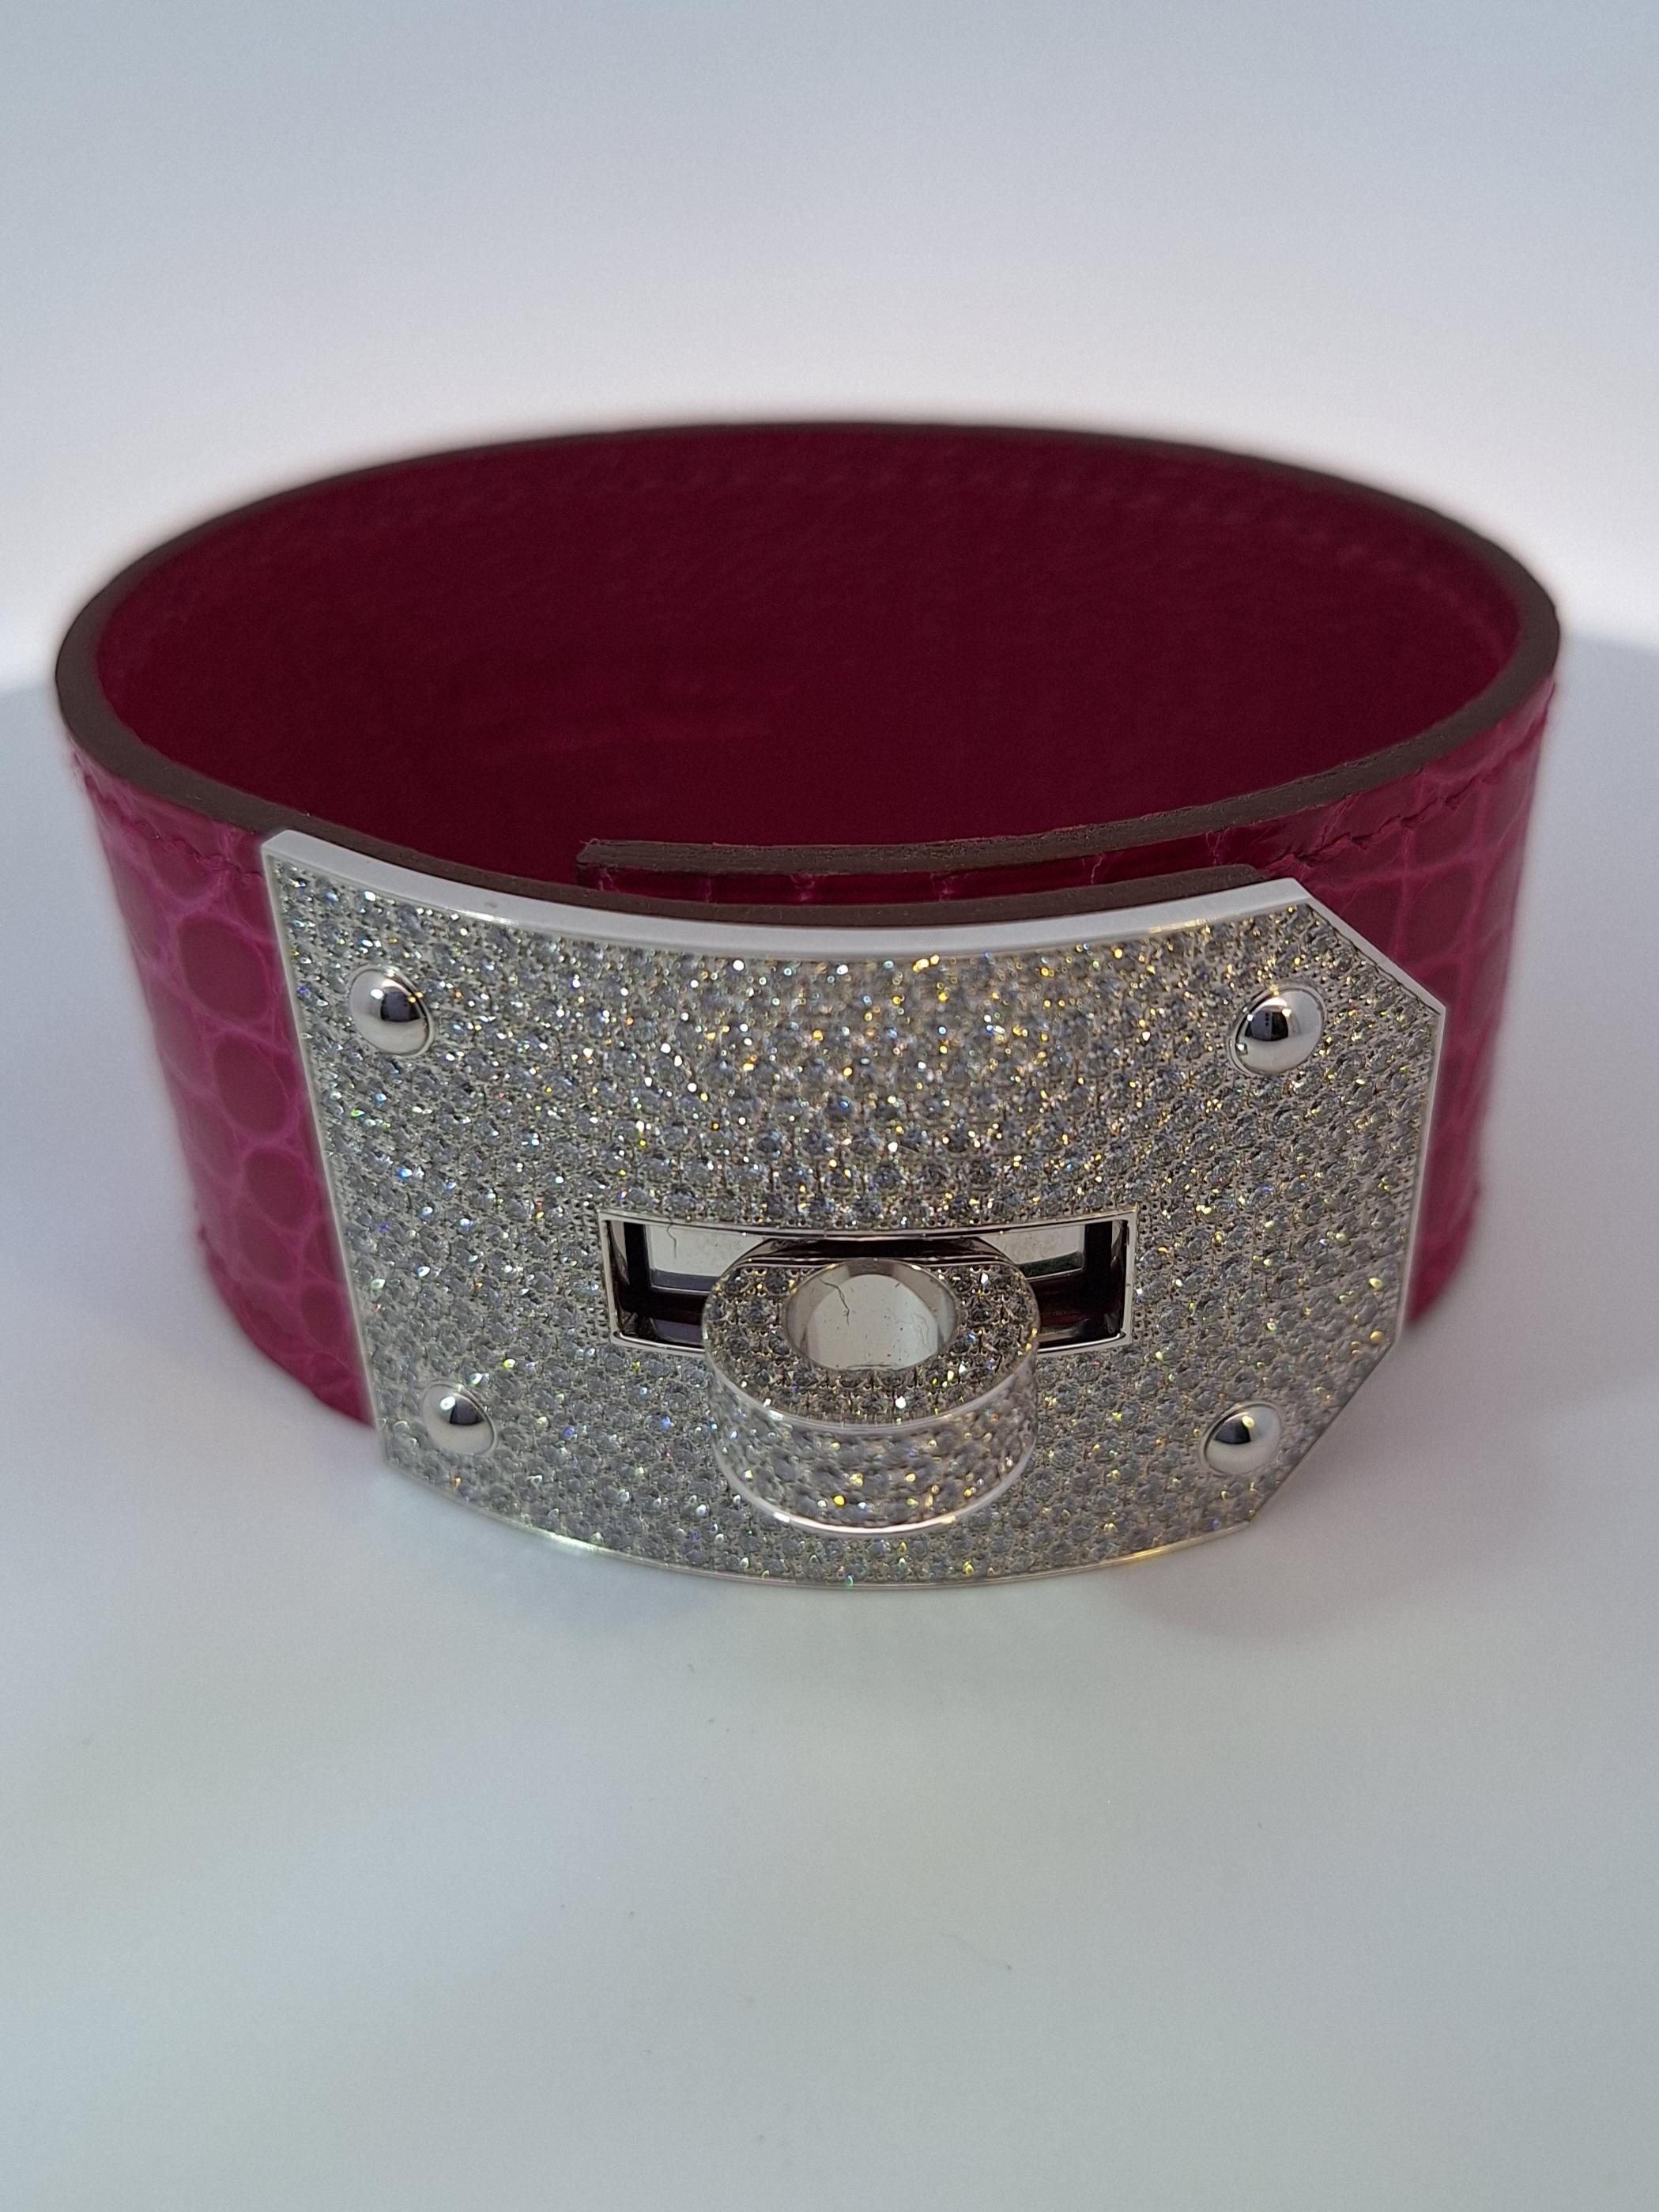 18k White Gold Diamond Kelly Fuchsia Crocodile Wide Cuff Bangle Bracelet by Hermes. With 493 Round brilliant cut diamonds VVS1 clarity, E color total weight approximately 6.75ct This bracelet comes with original Hermes box.

Details: Length: 6.5